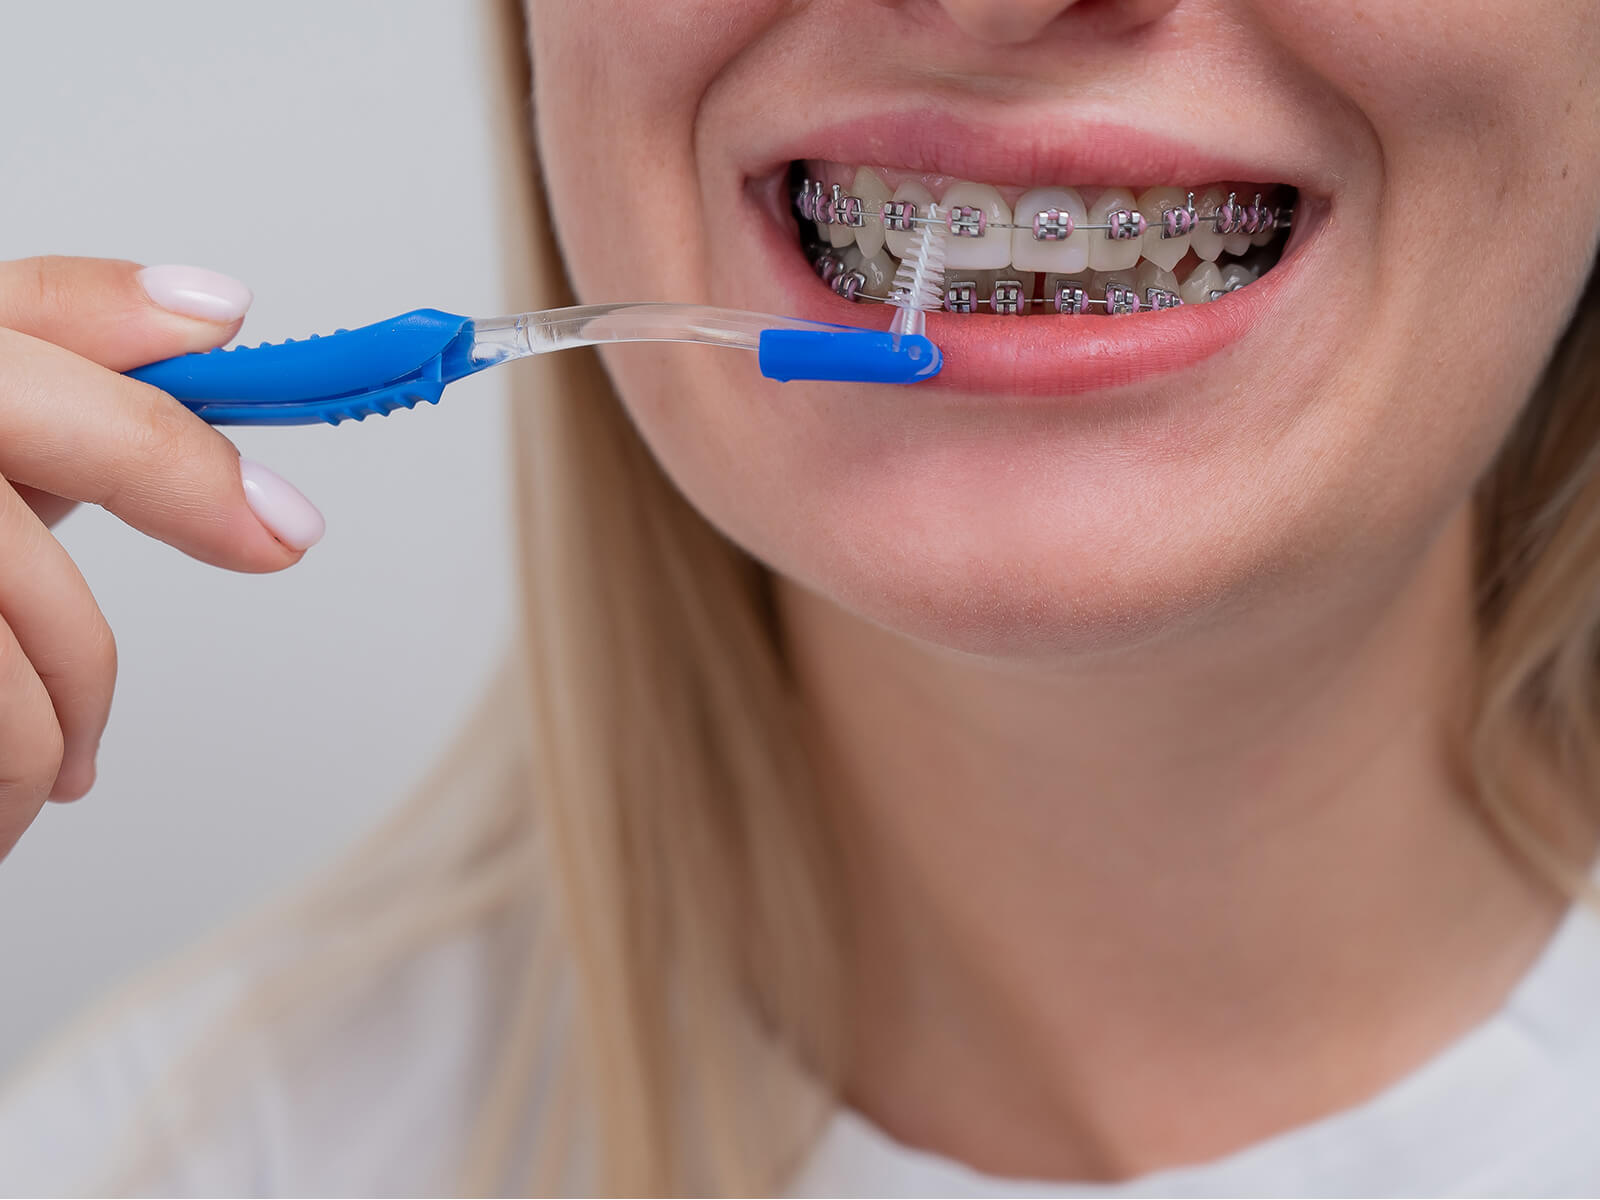 Can You Use An Electric Toothbrush With Braces?